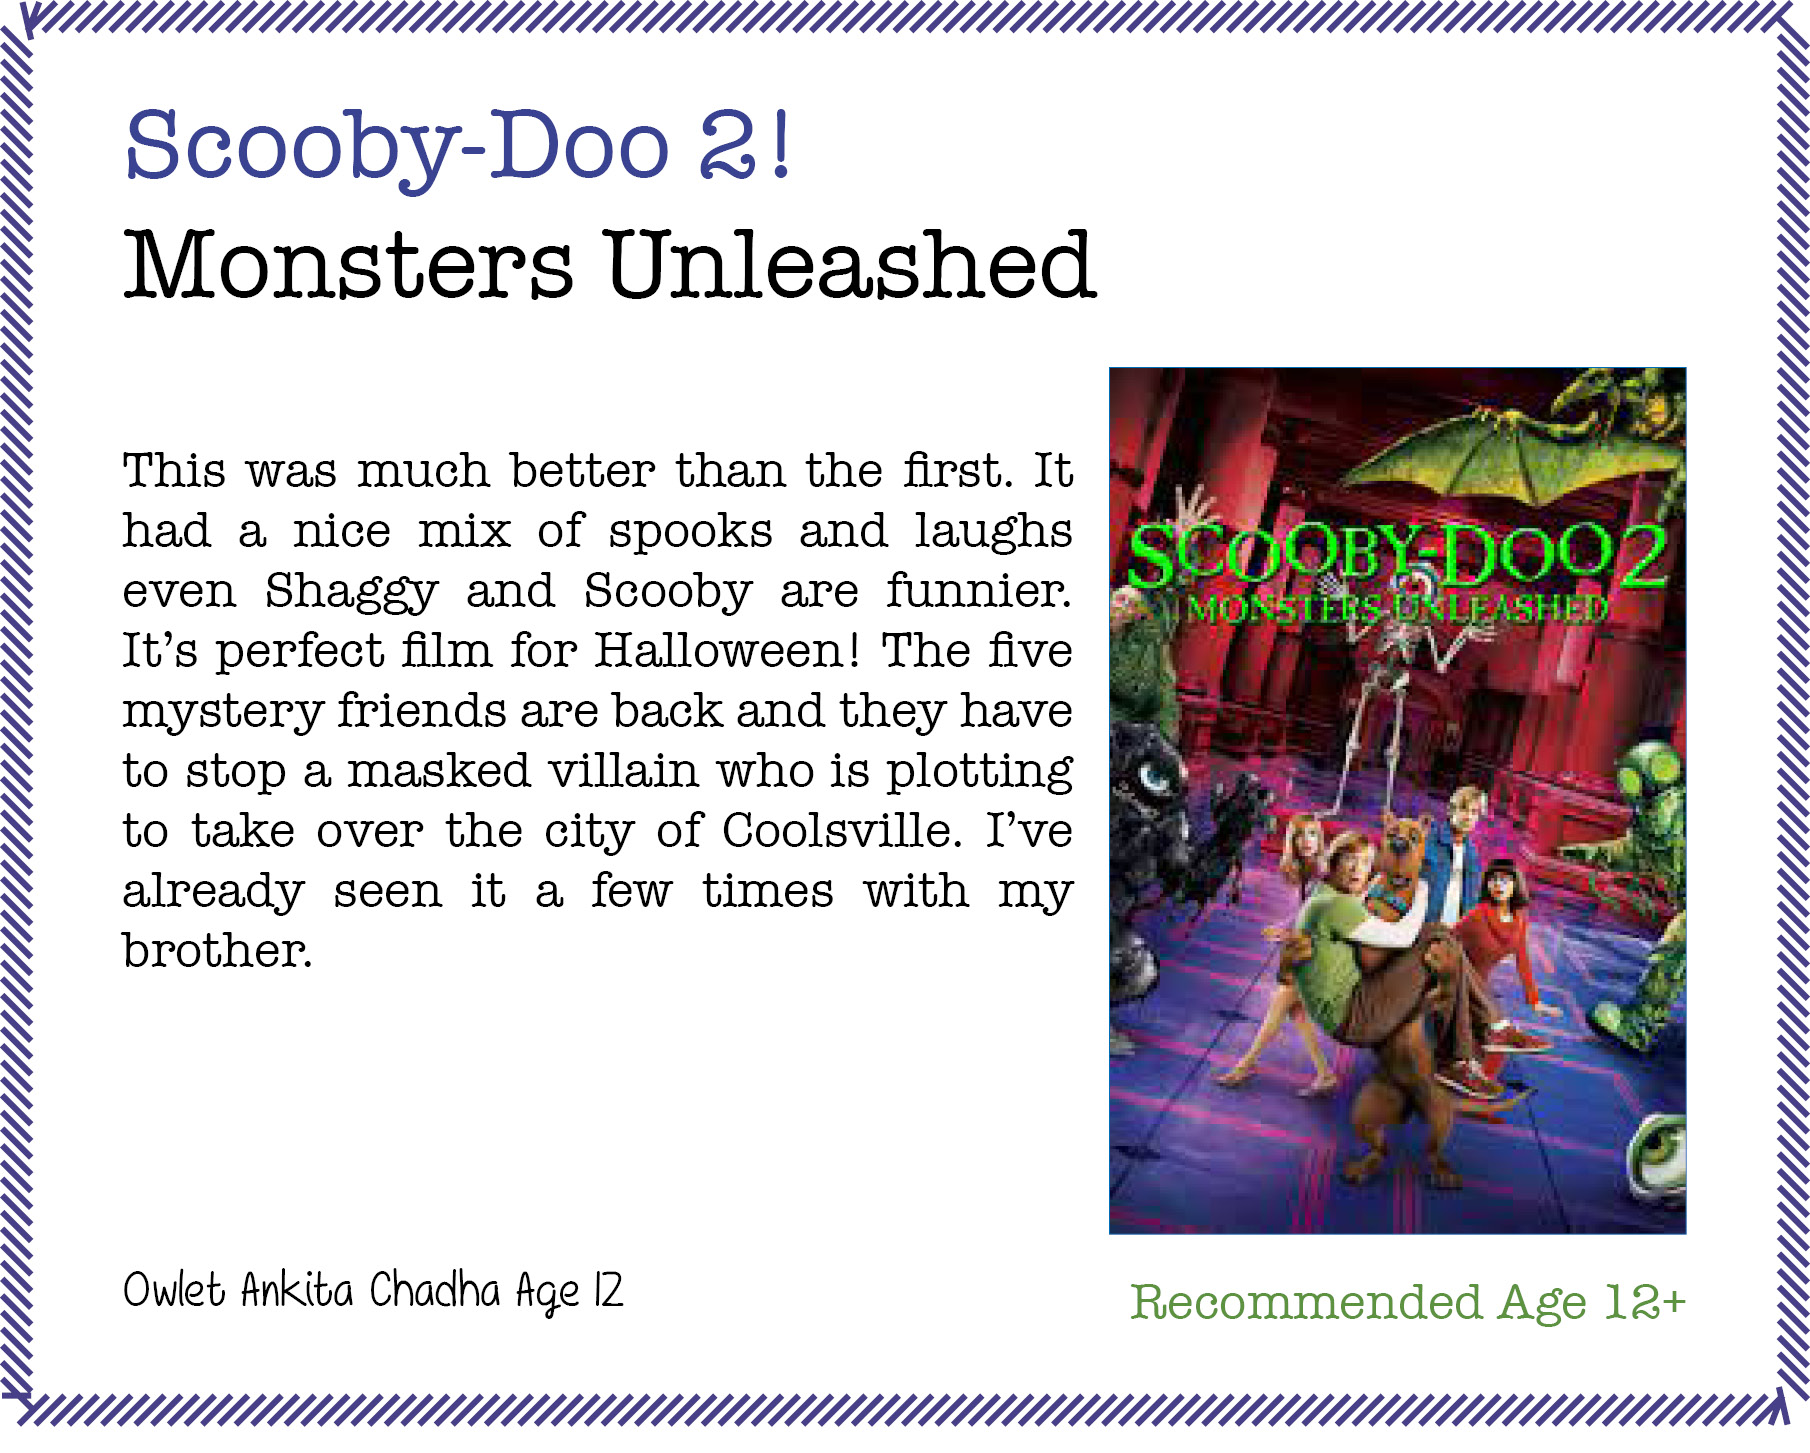 Scooby-Doo 2! Monsters Unleashed